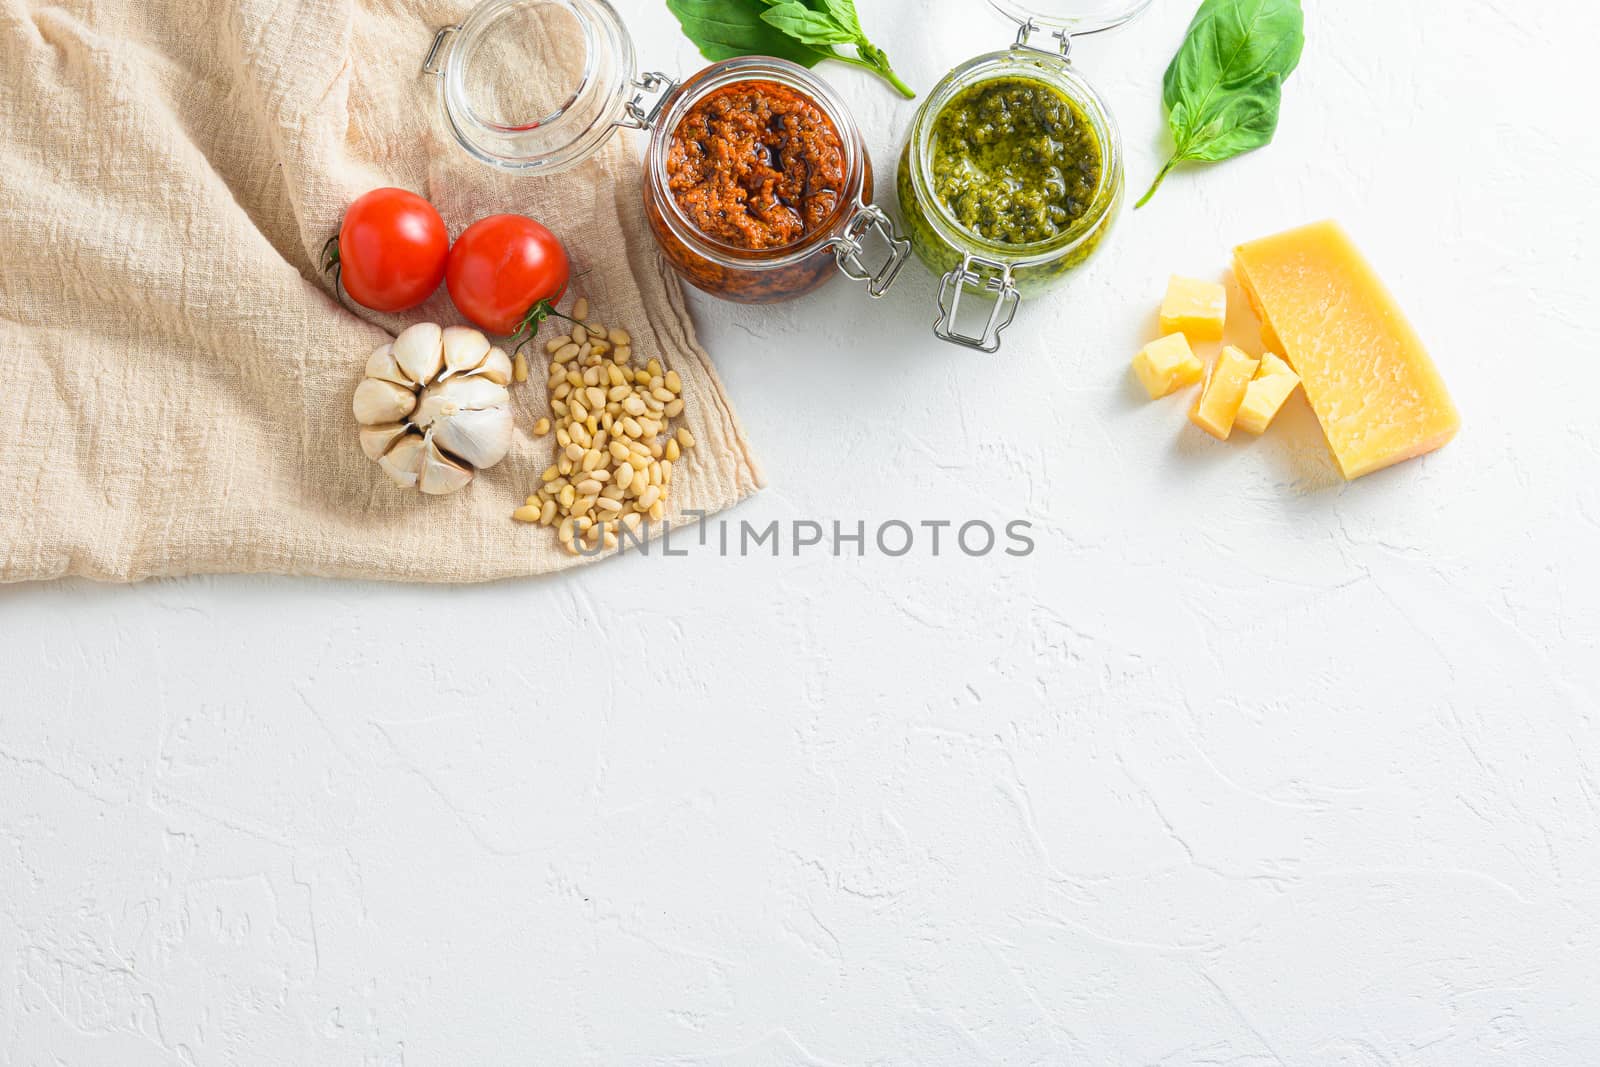 red pesto and green pesto Glass jars with cooking italian recipe ingredients Parmesan cheese, basil leaves, pine nuts, olive oil, garlic, salt, tomatoes top view on white textured concrete surface space for text